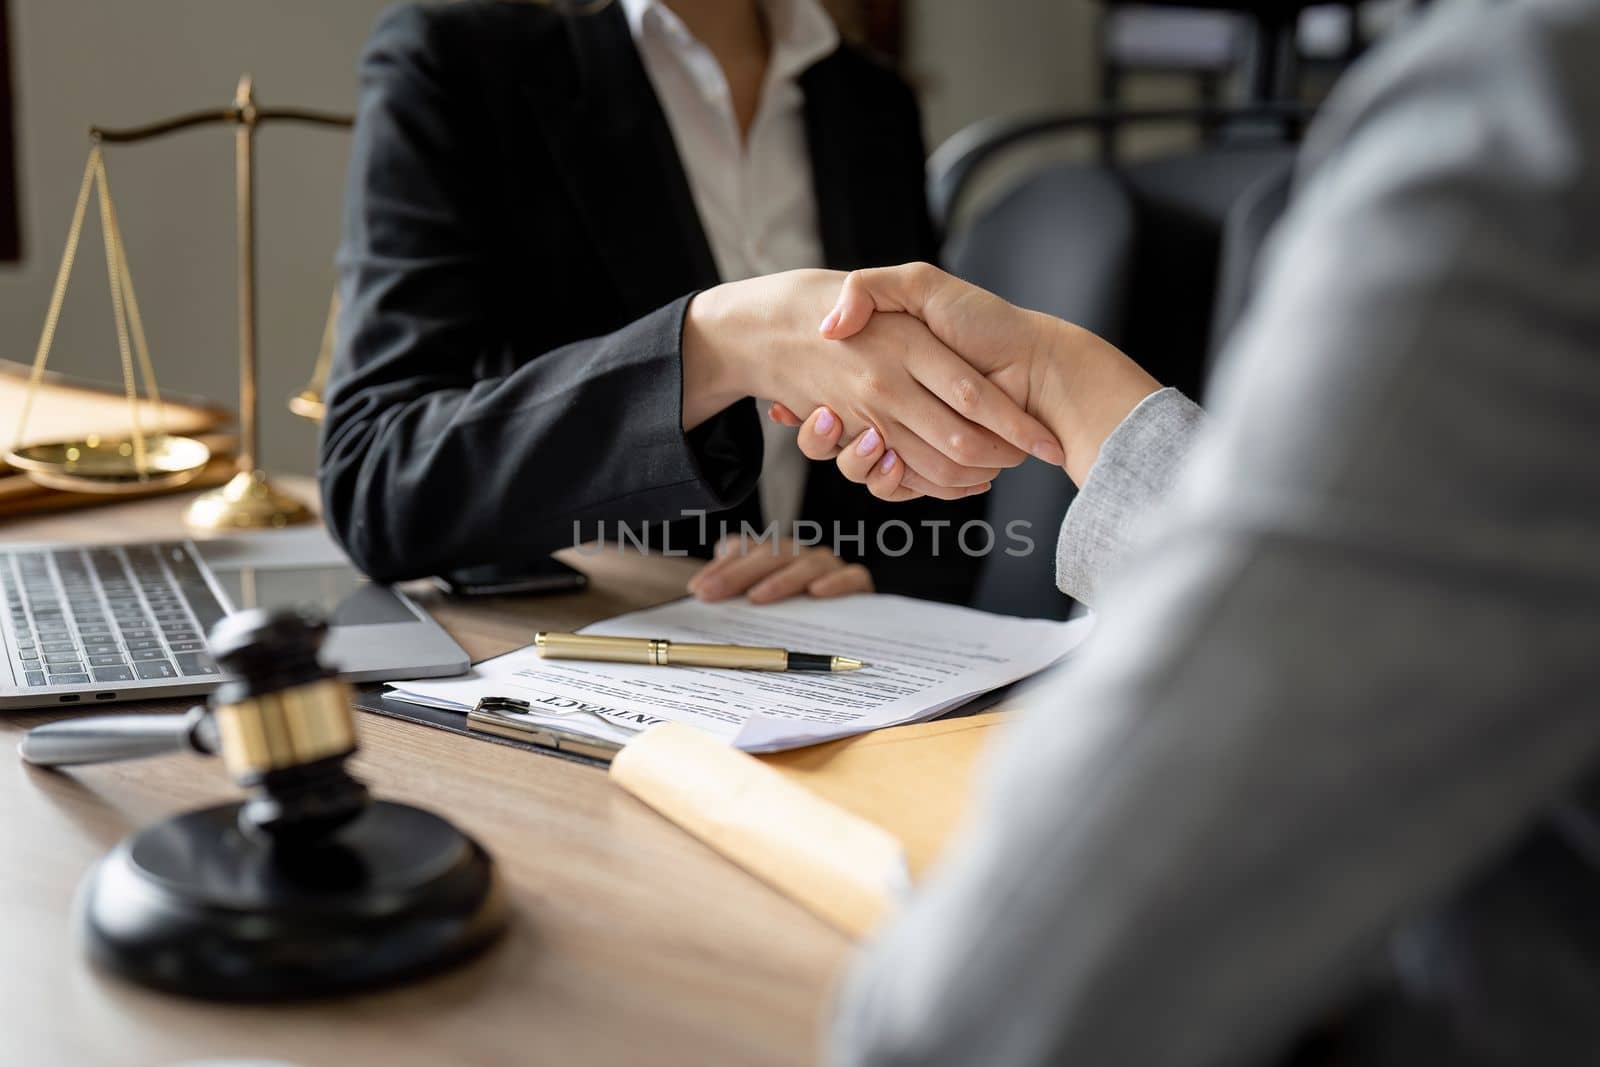 Gavel Justice hammer on wooden table with judge and client shaking hands after adviced in background at courtroom, lawyer service concept